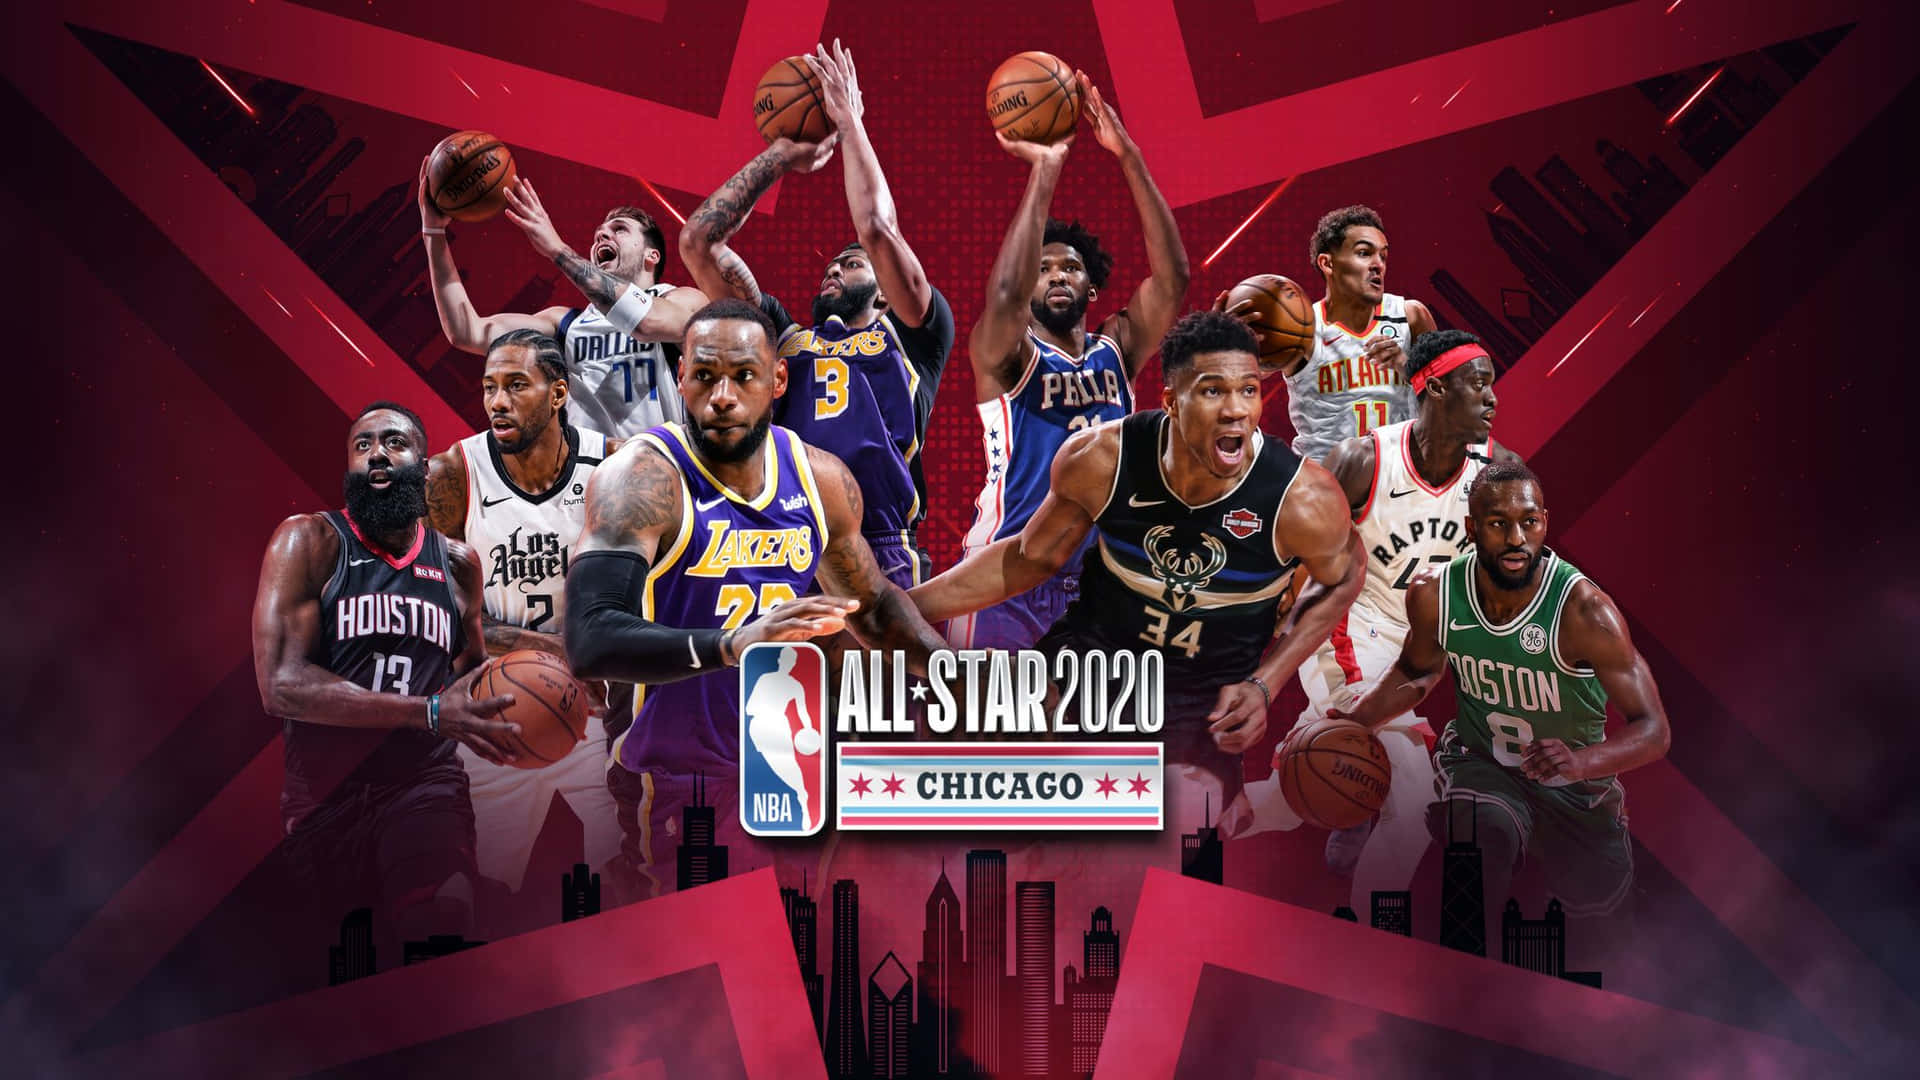 Nba All-star Players In Action Wallpaper